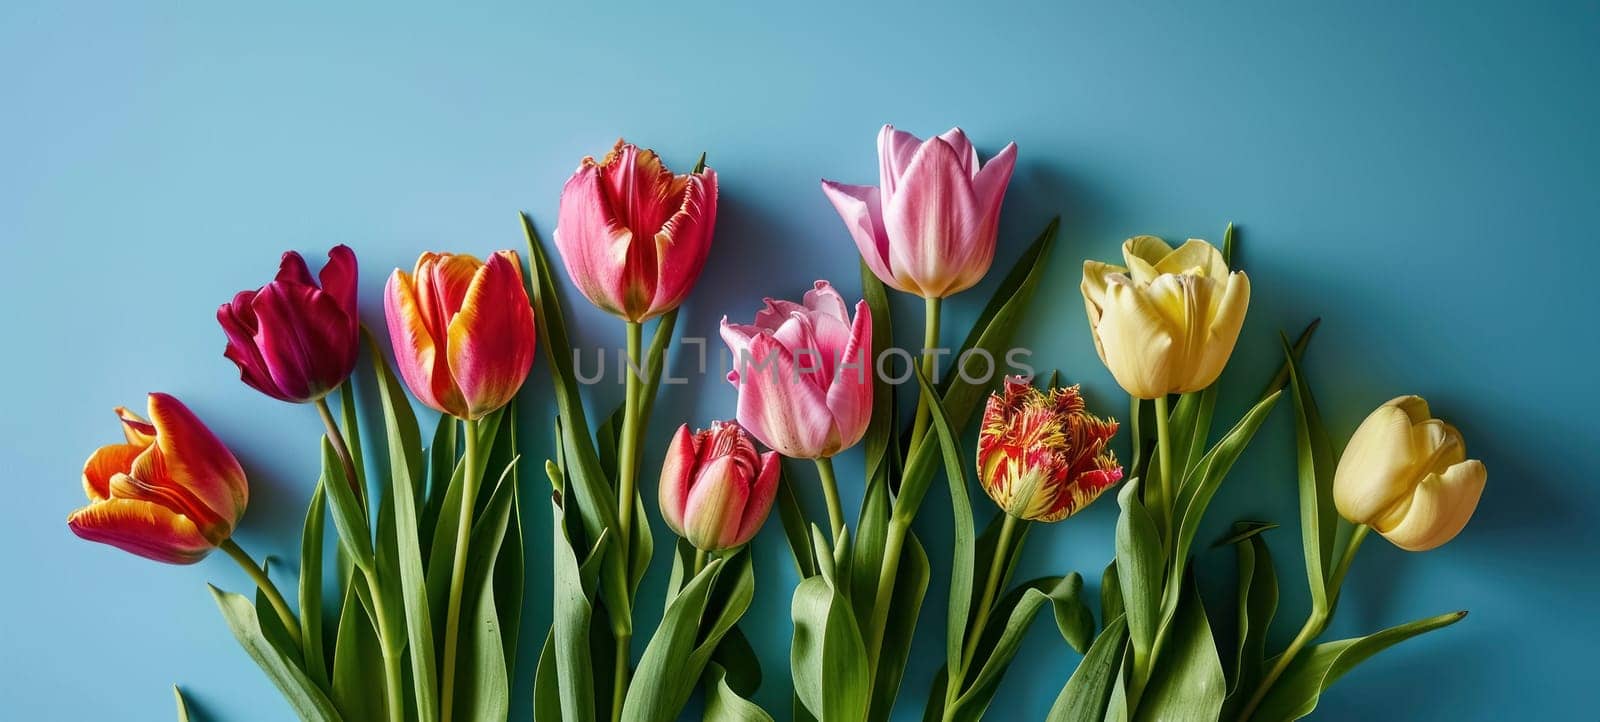 Assorted tulips in vibrant colors arranged against a calming blue backdrop, symbolizing spring.